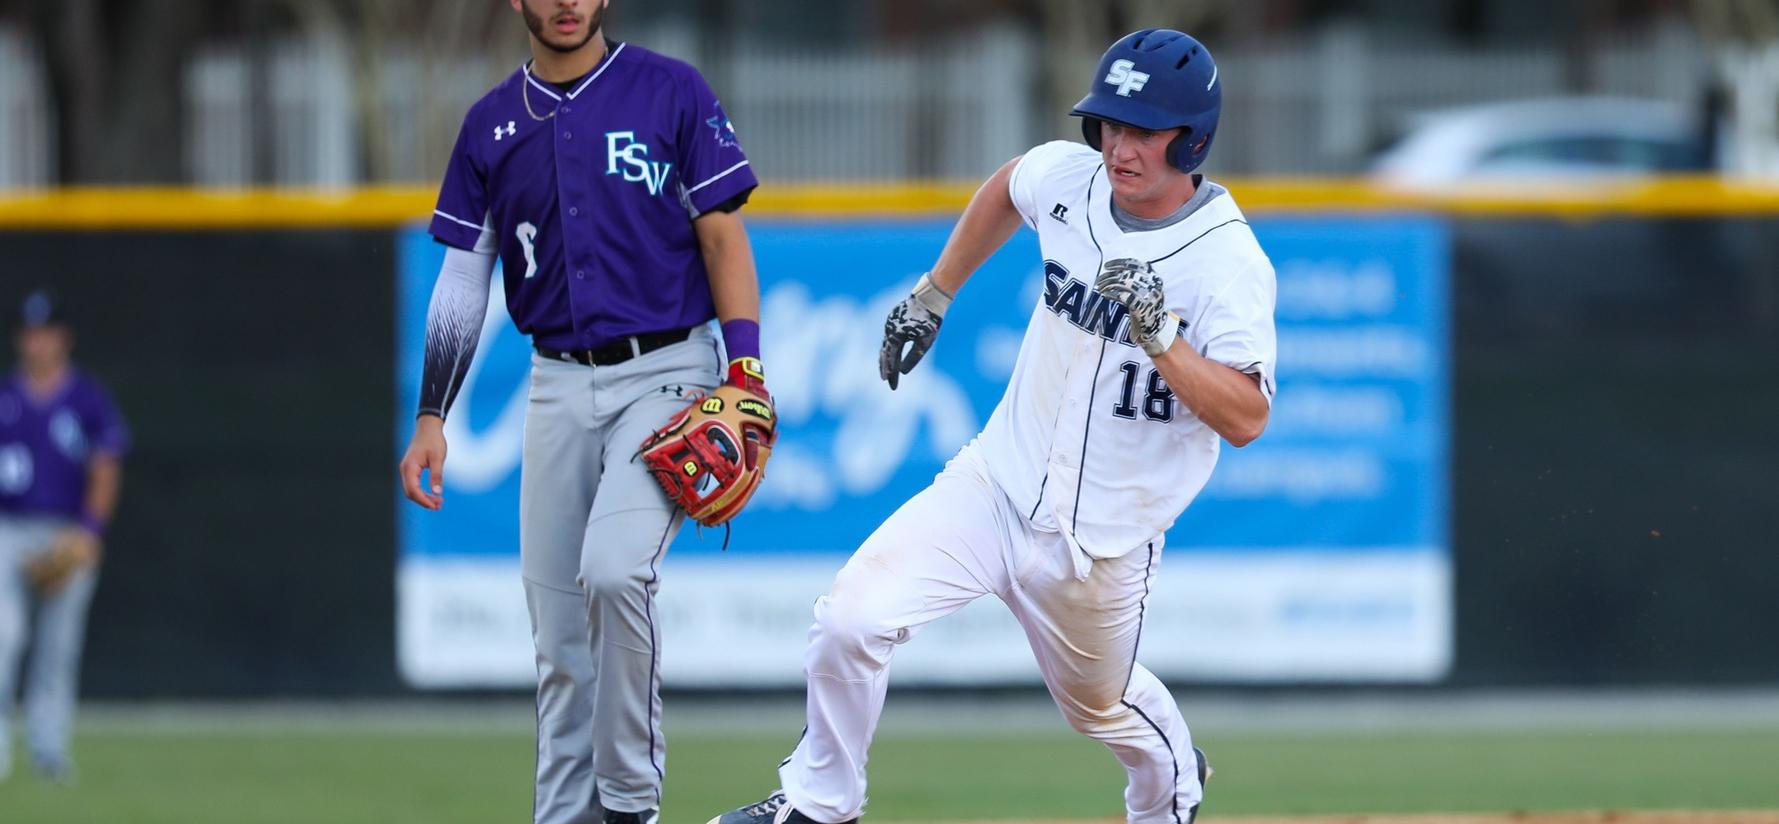 Saints Finish Sweep of Central Florida, 10-8